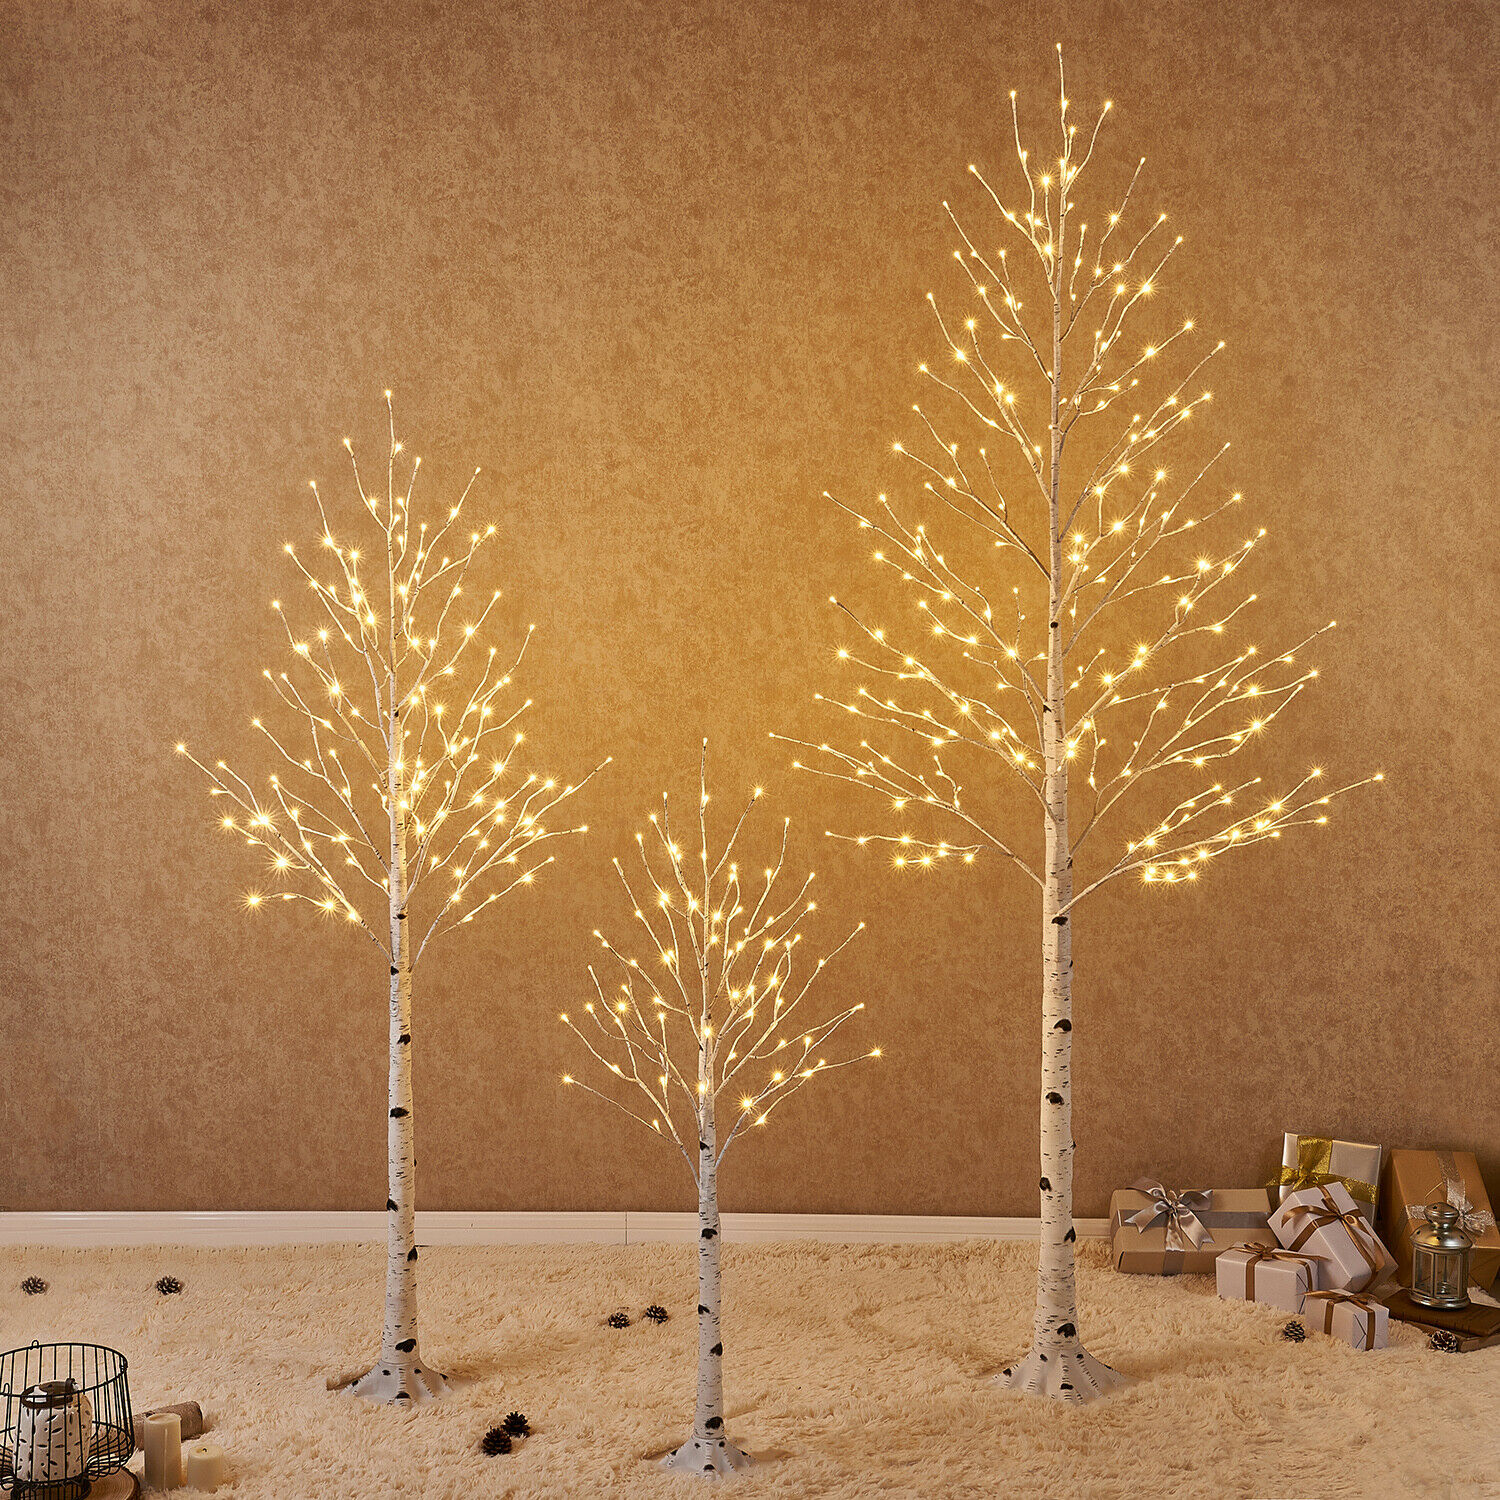 Hairui Lighted White Birch Twig Tree Twinkle Led Christmas Home Party Decoration